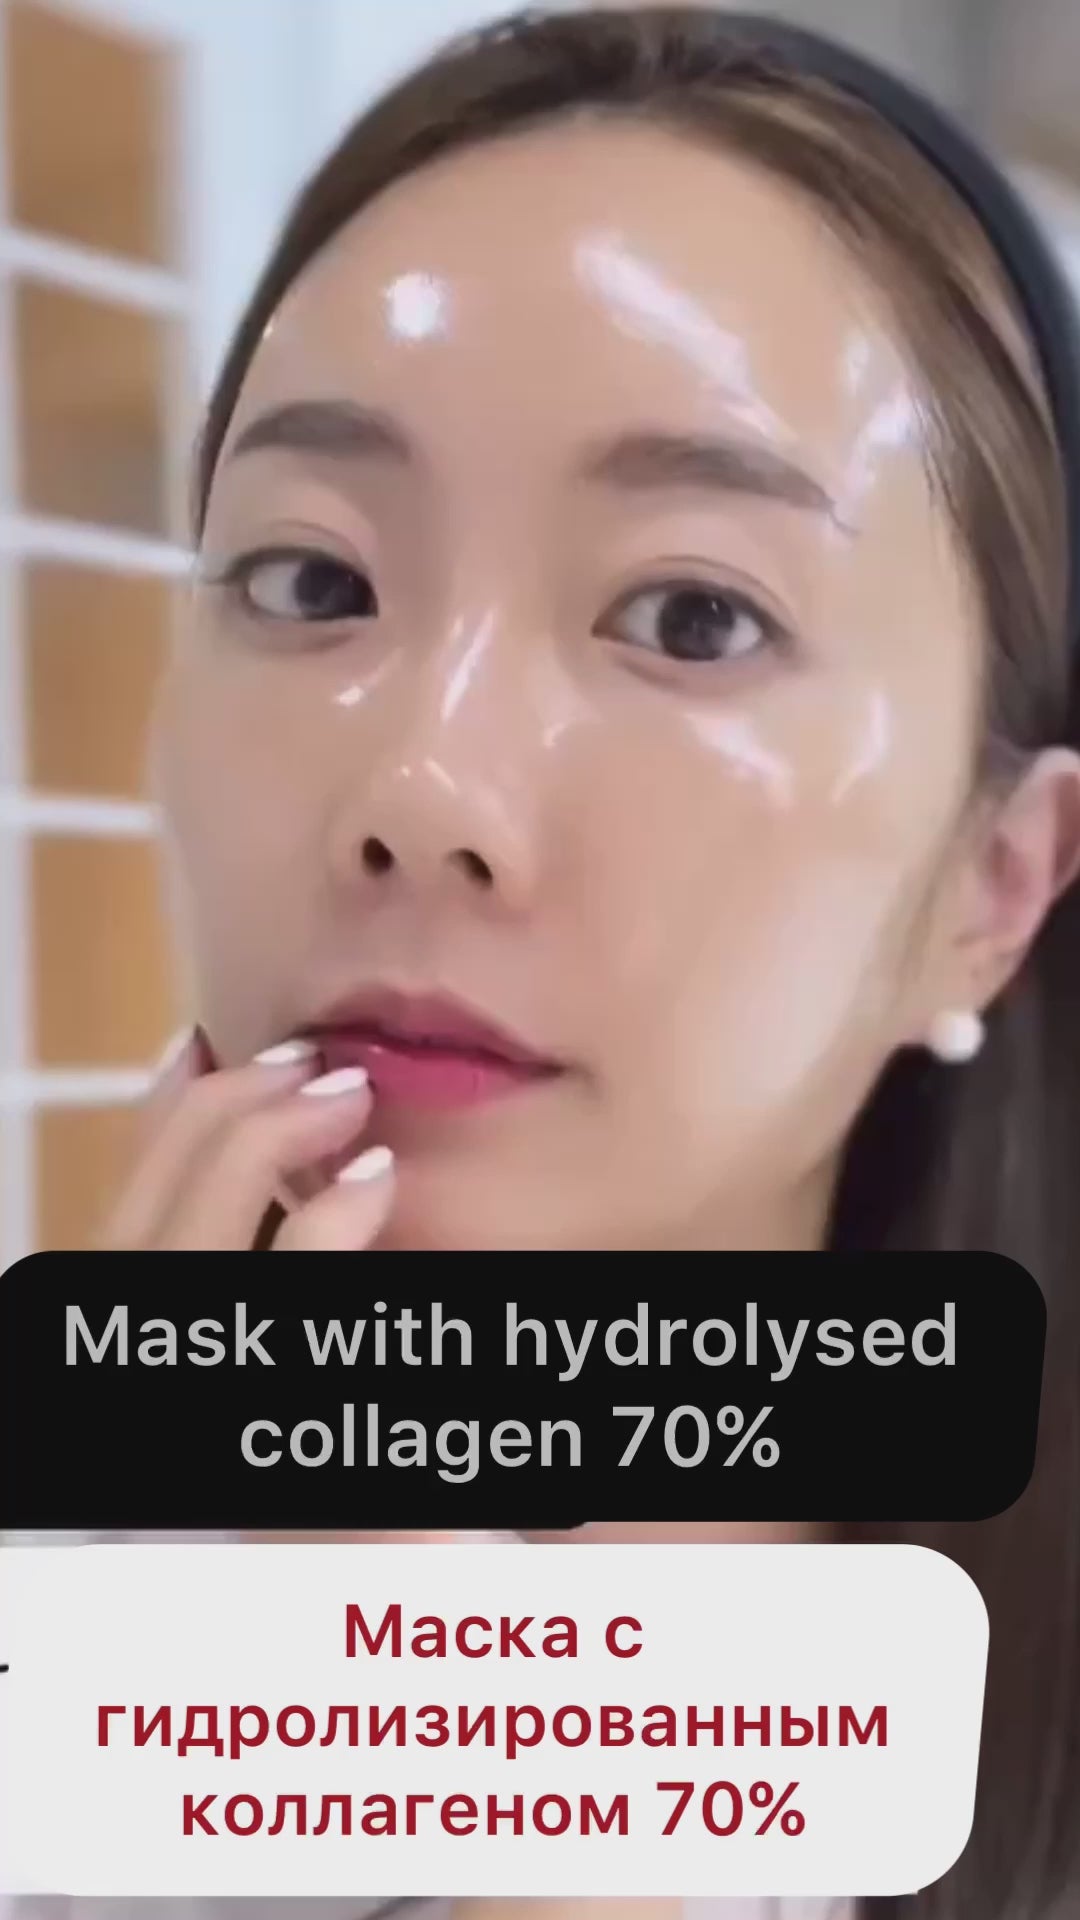 Facial wrapping mask by Medi-peel – koreancosmetic.cy